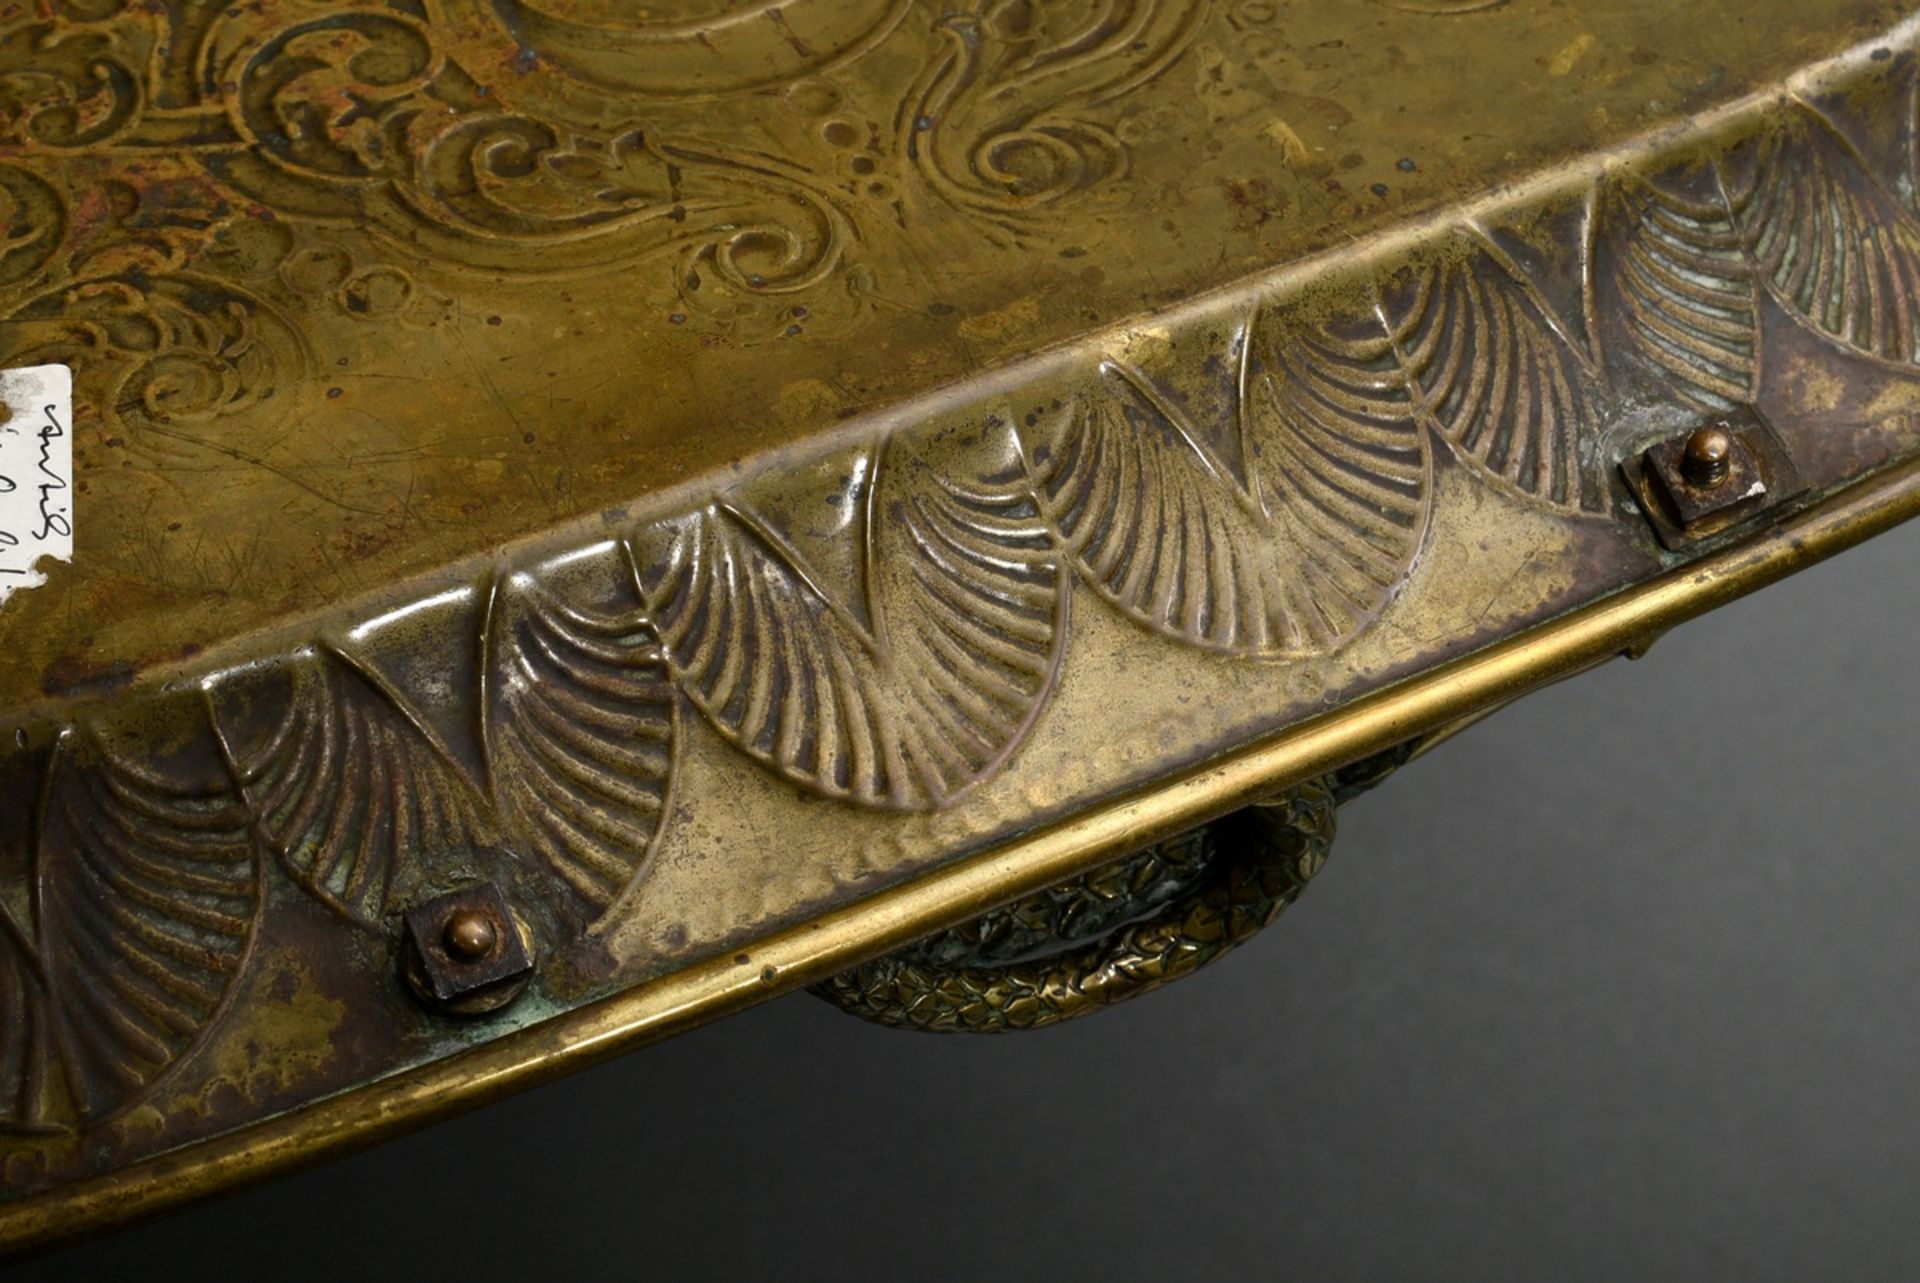 Rectangular brass tray with floral engraving and sculpted snake handles, 19th century, 56x45cm - Image 6 of 6